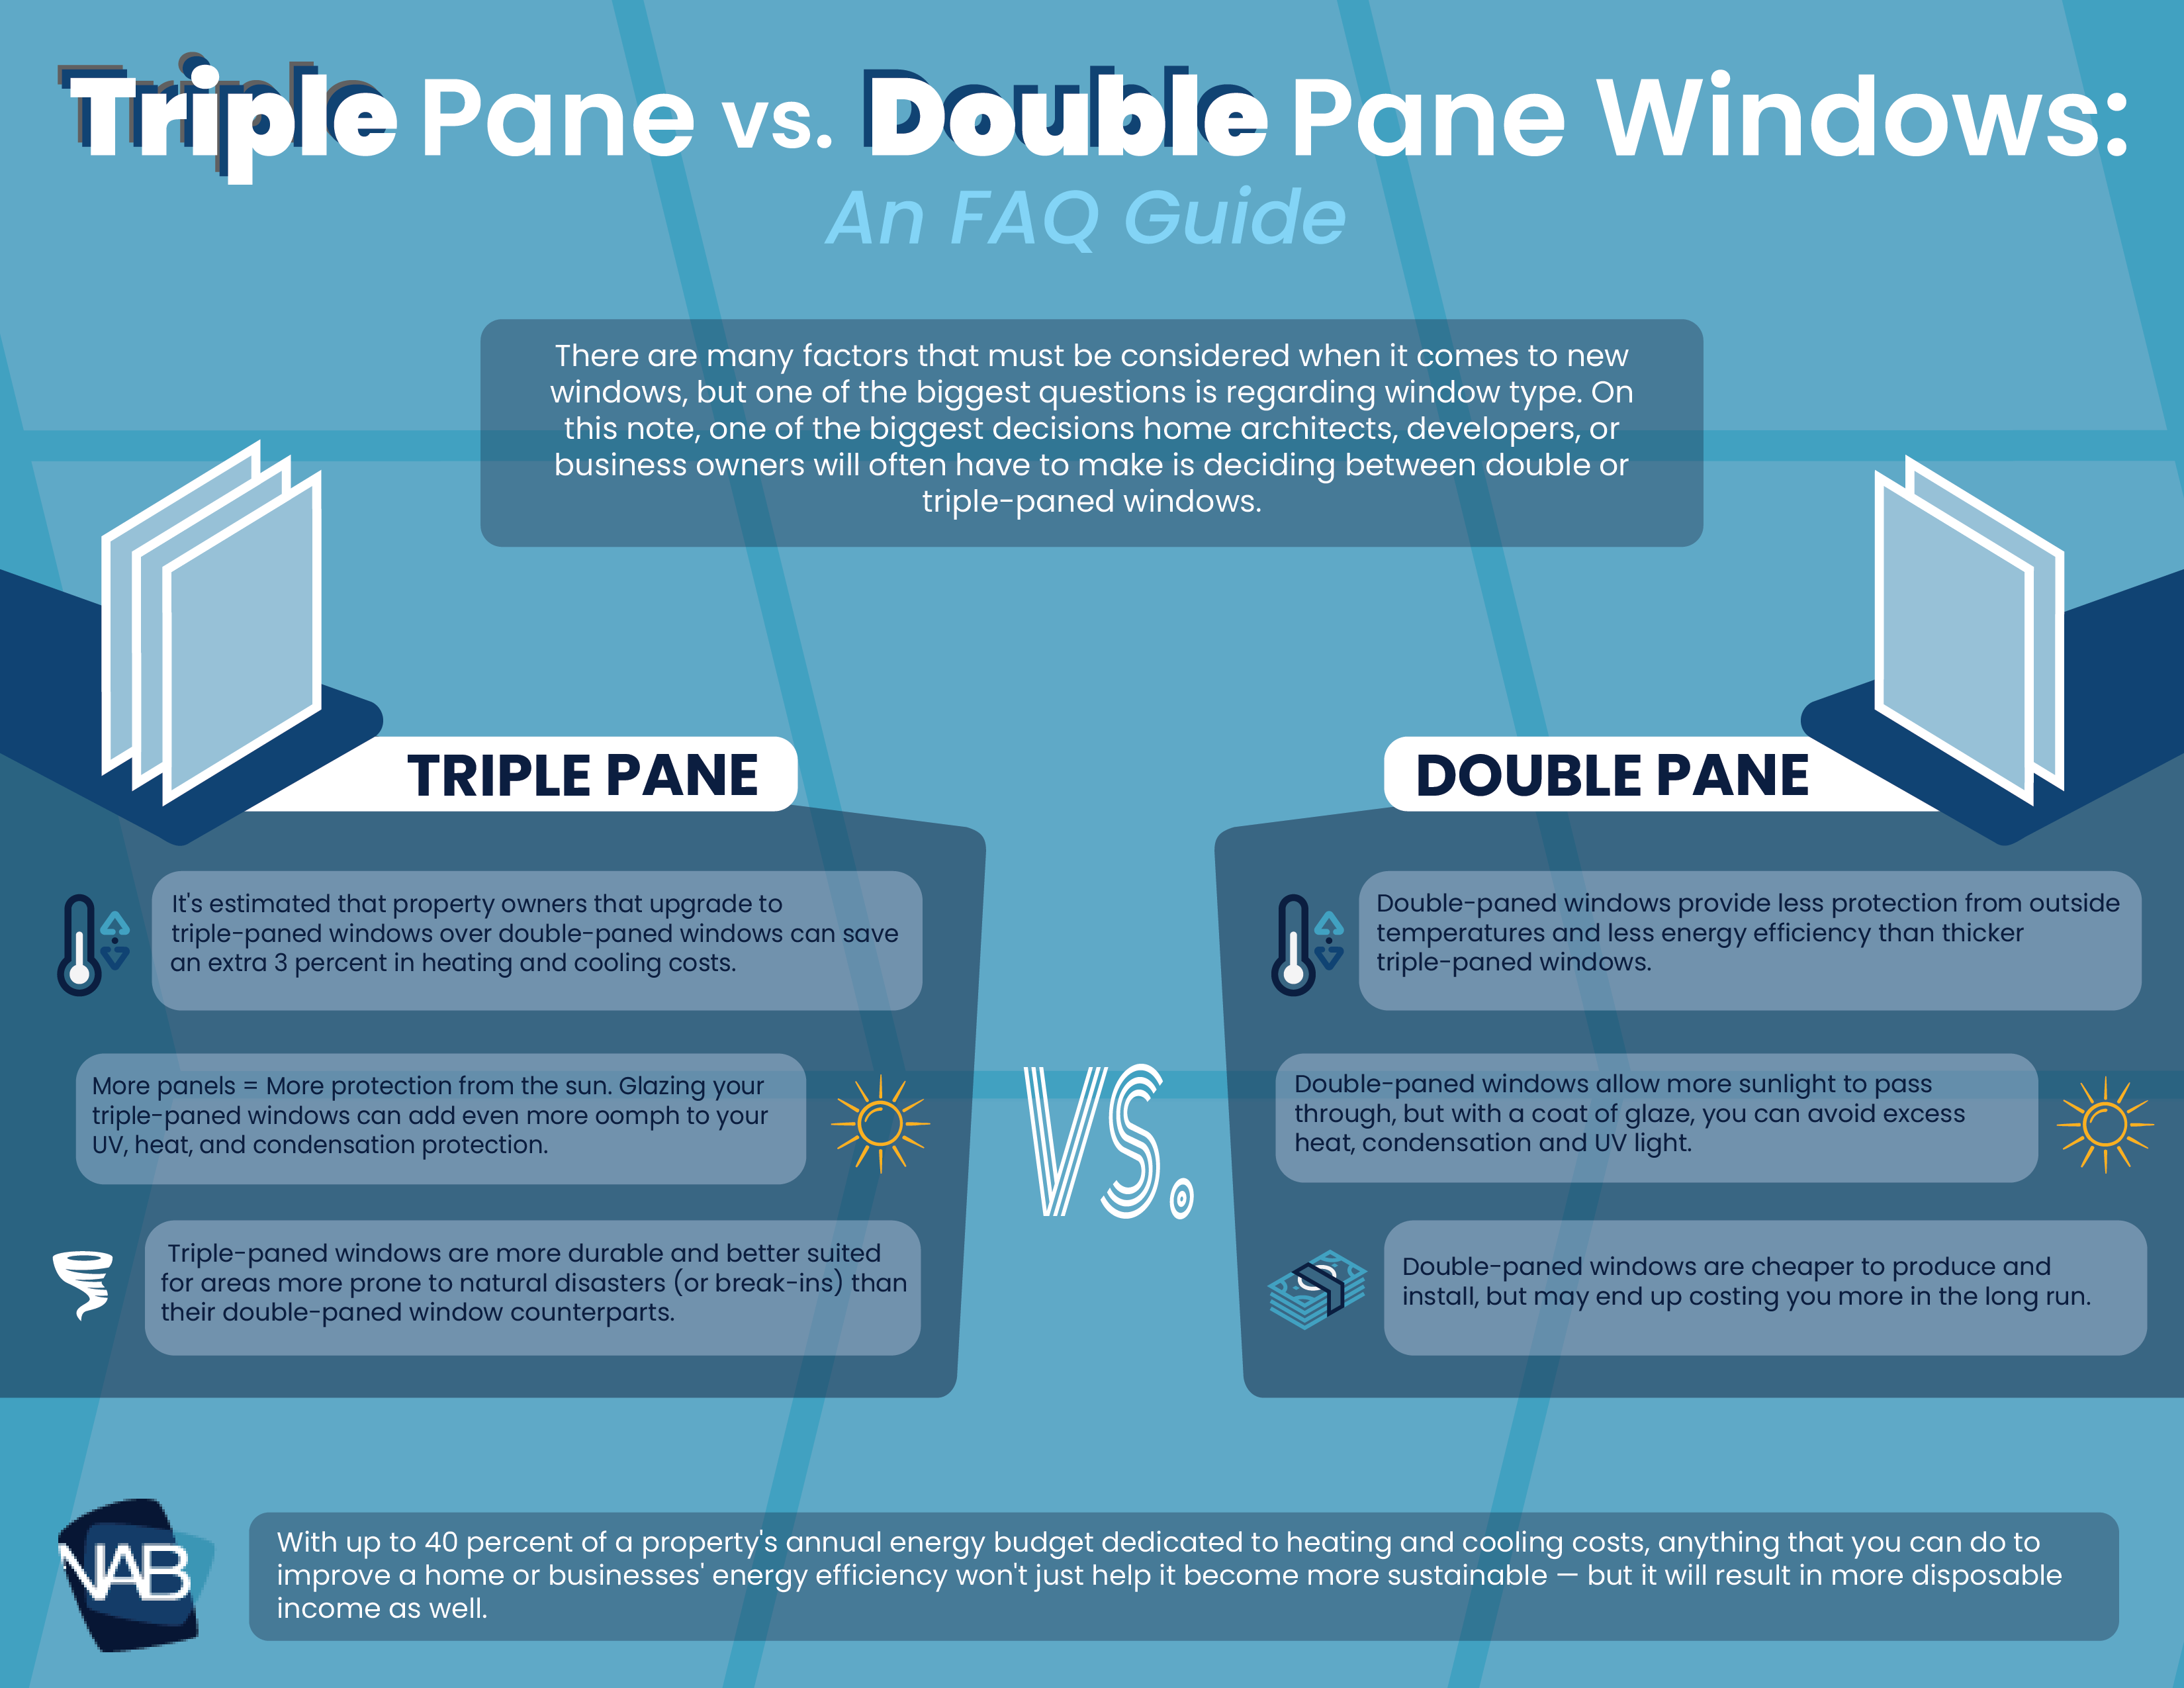 Double-Pane vs Triple-Pane Windows – What's the Difference?